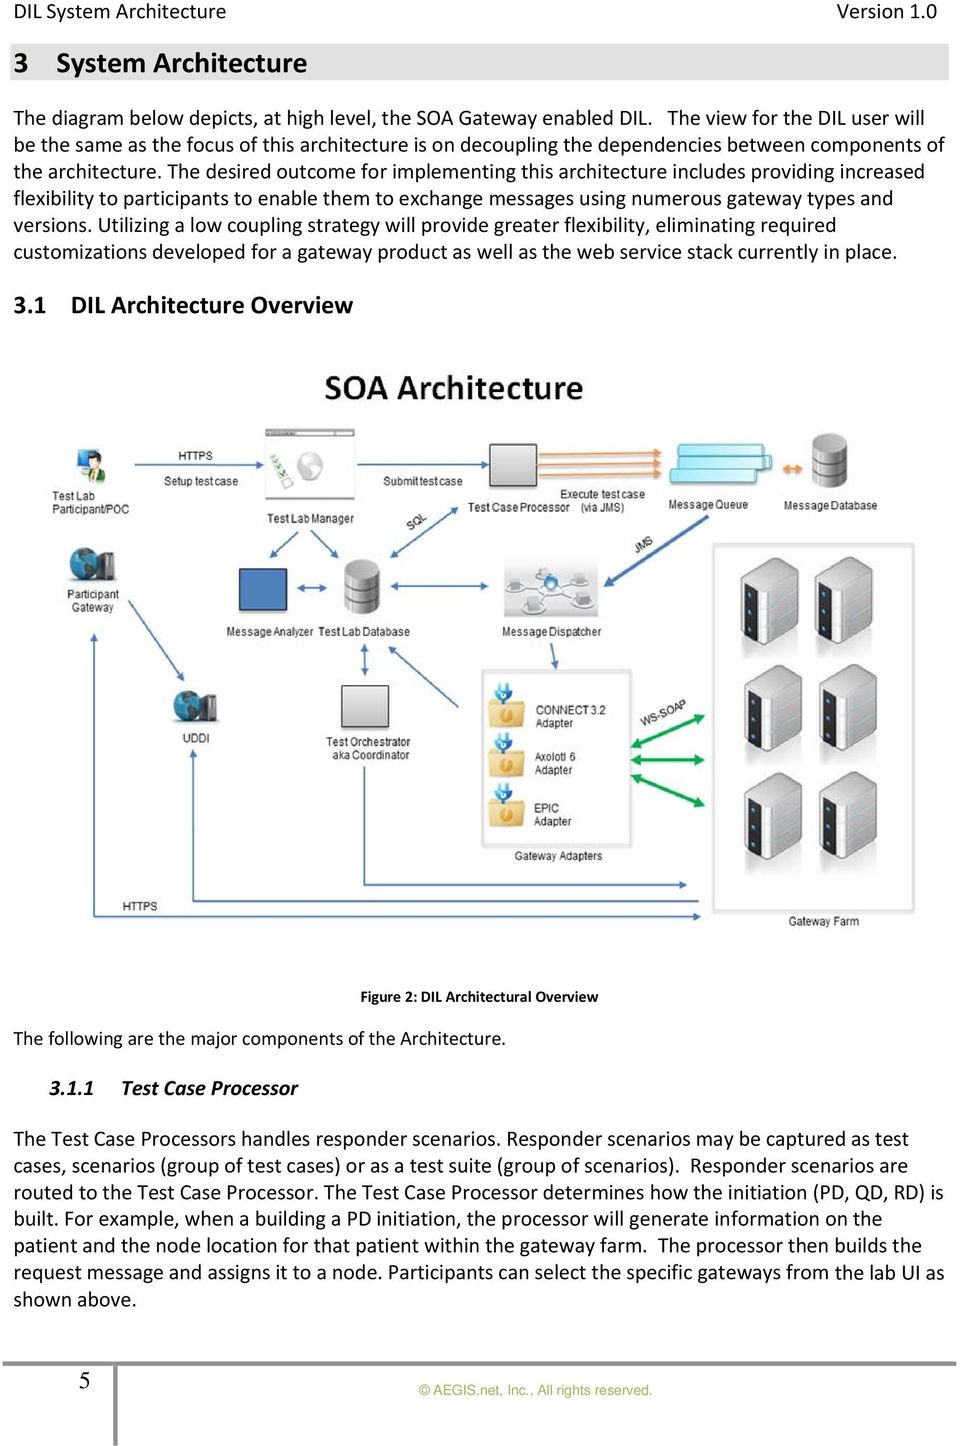 The desired outcome for implementing this architecture includes providing increased flexibility to participants to enable them to exchange messages using numerous gateway types and versions.